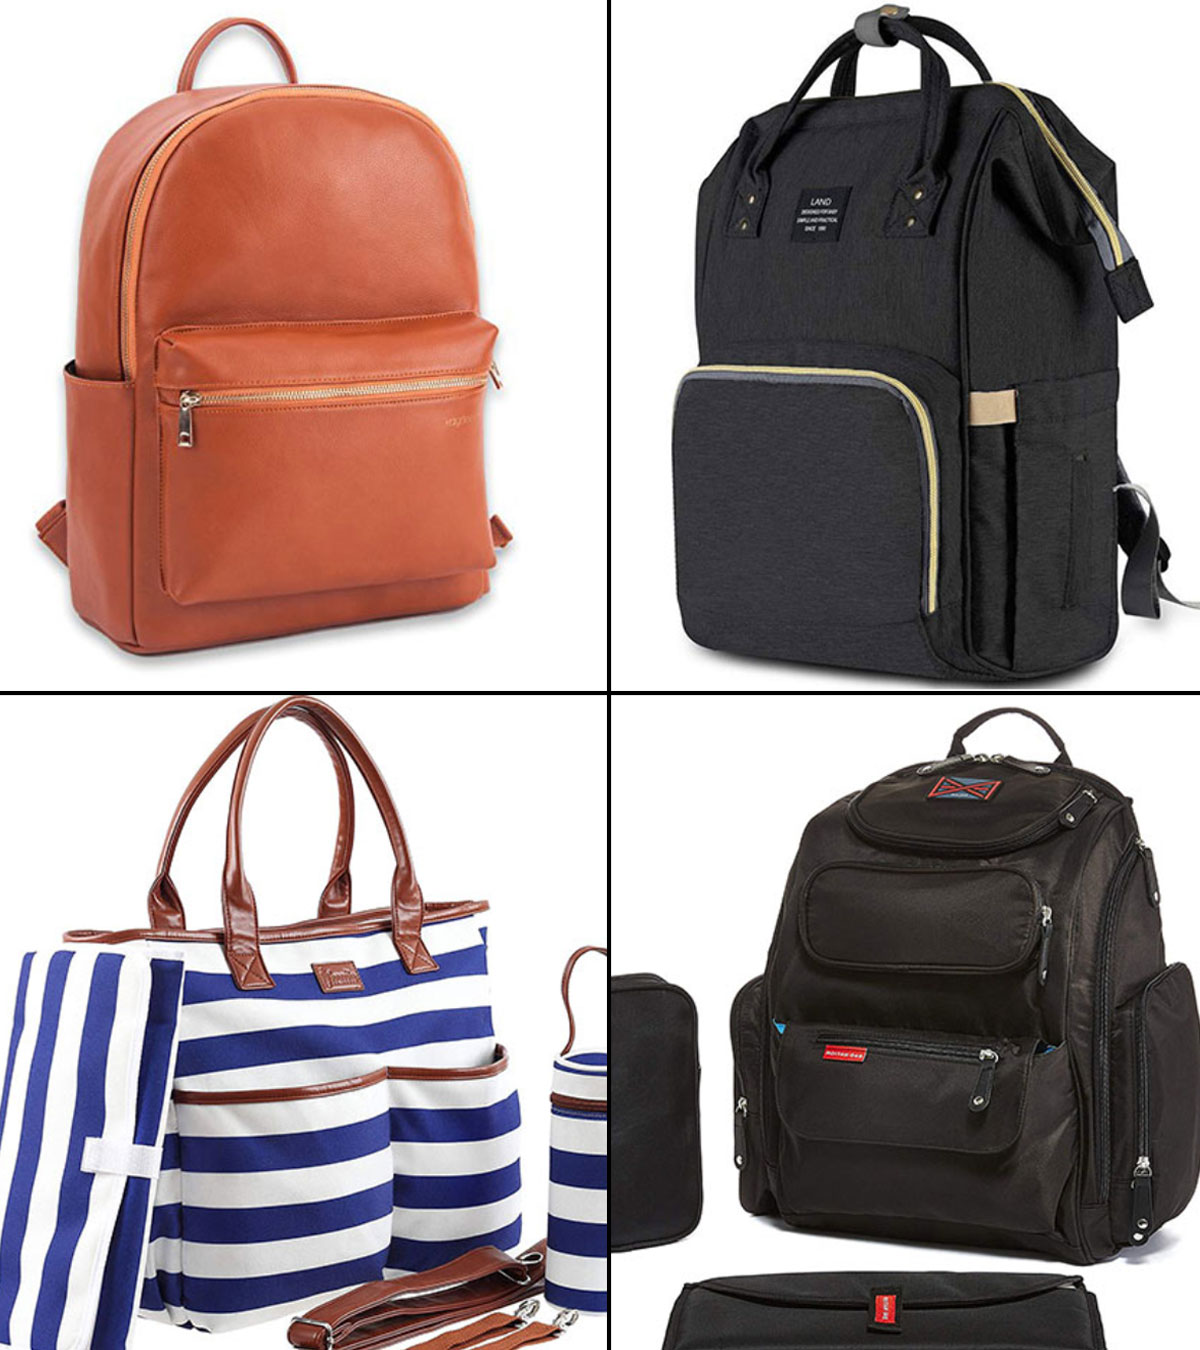 Stylish Diaper Bags & Accessories We're Loving Now - The Mom Edit